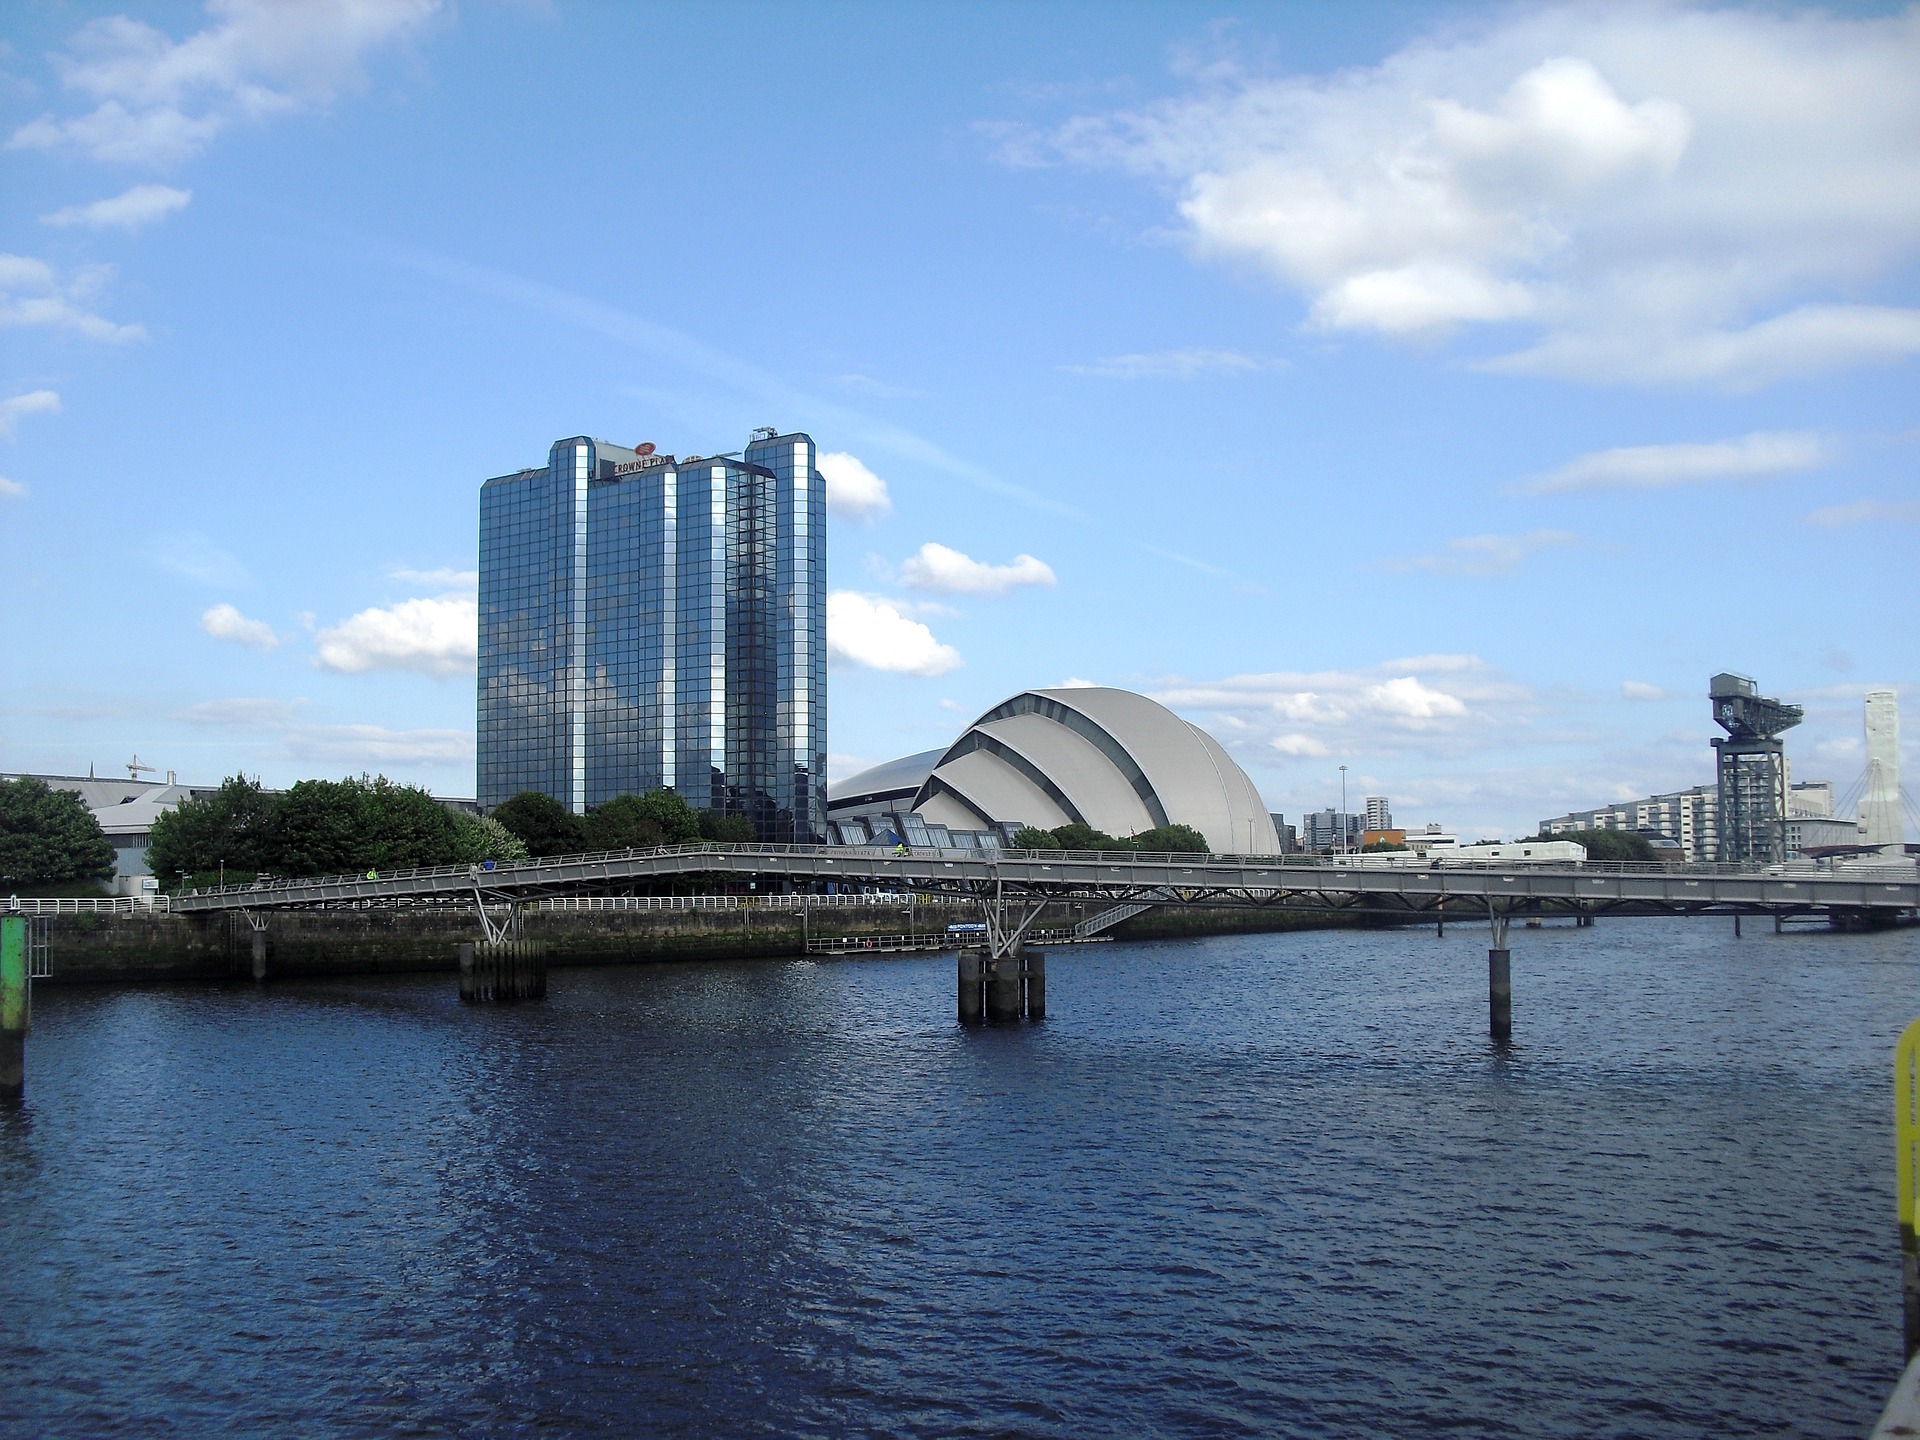 Glasgow exploring all options for bus governance